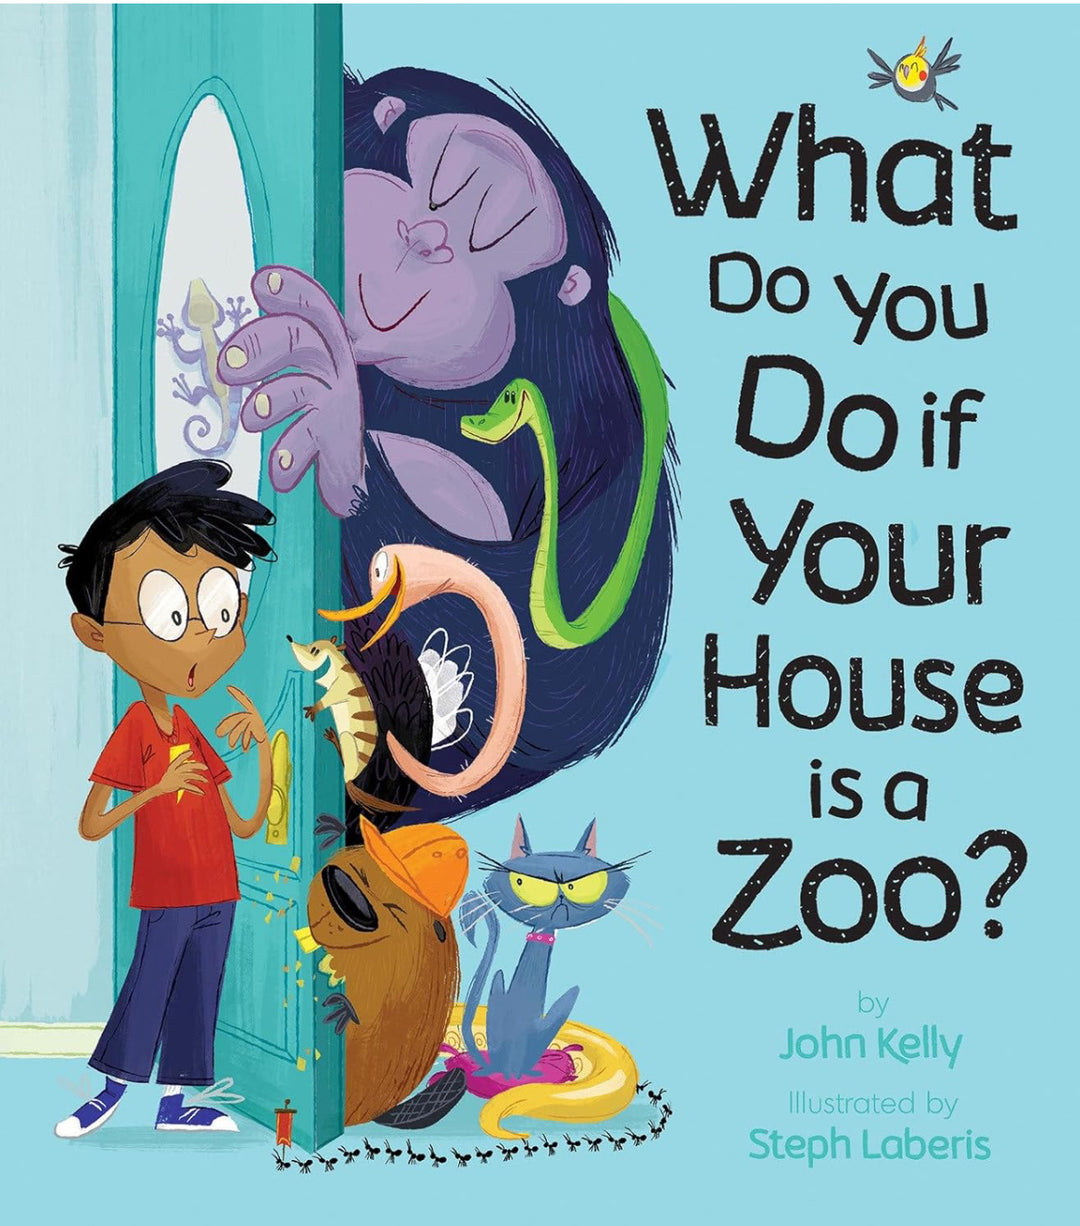 What do you do if your house is a zoo?